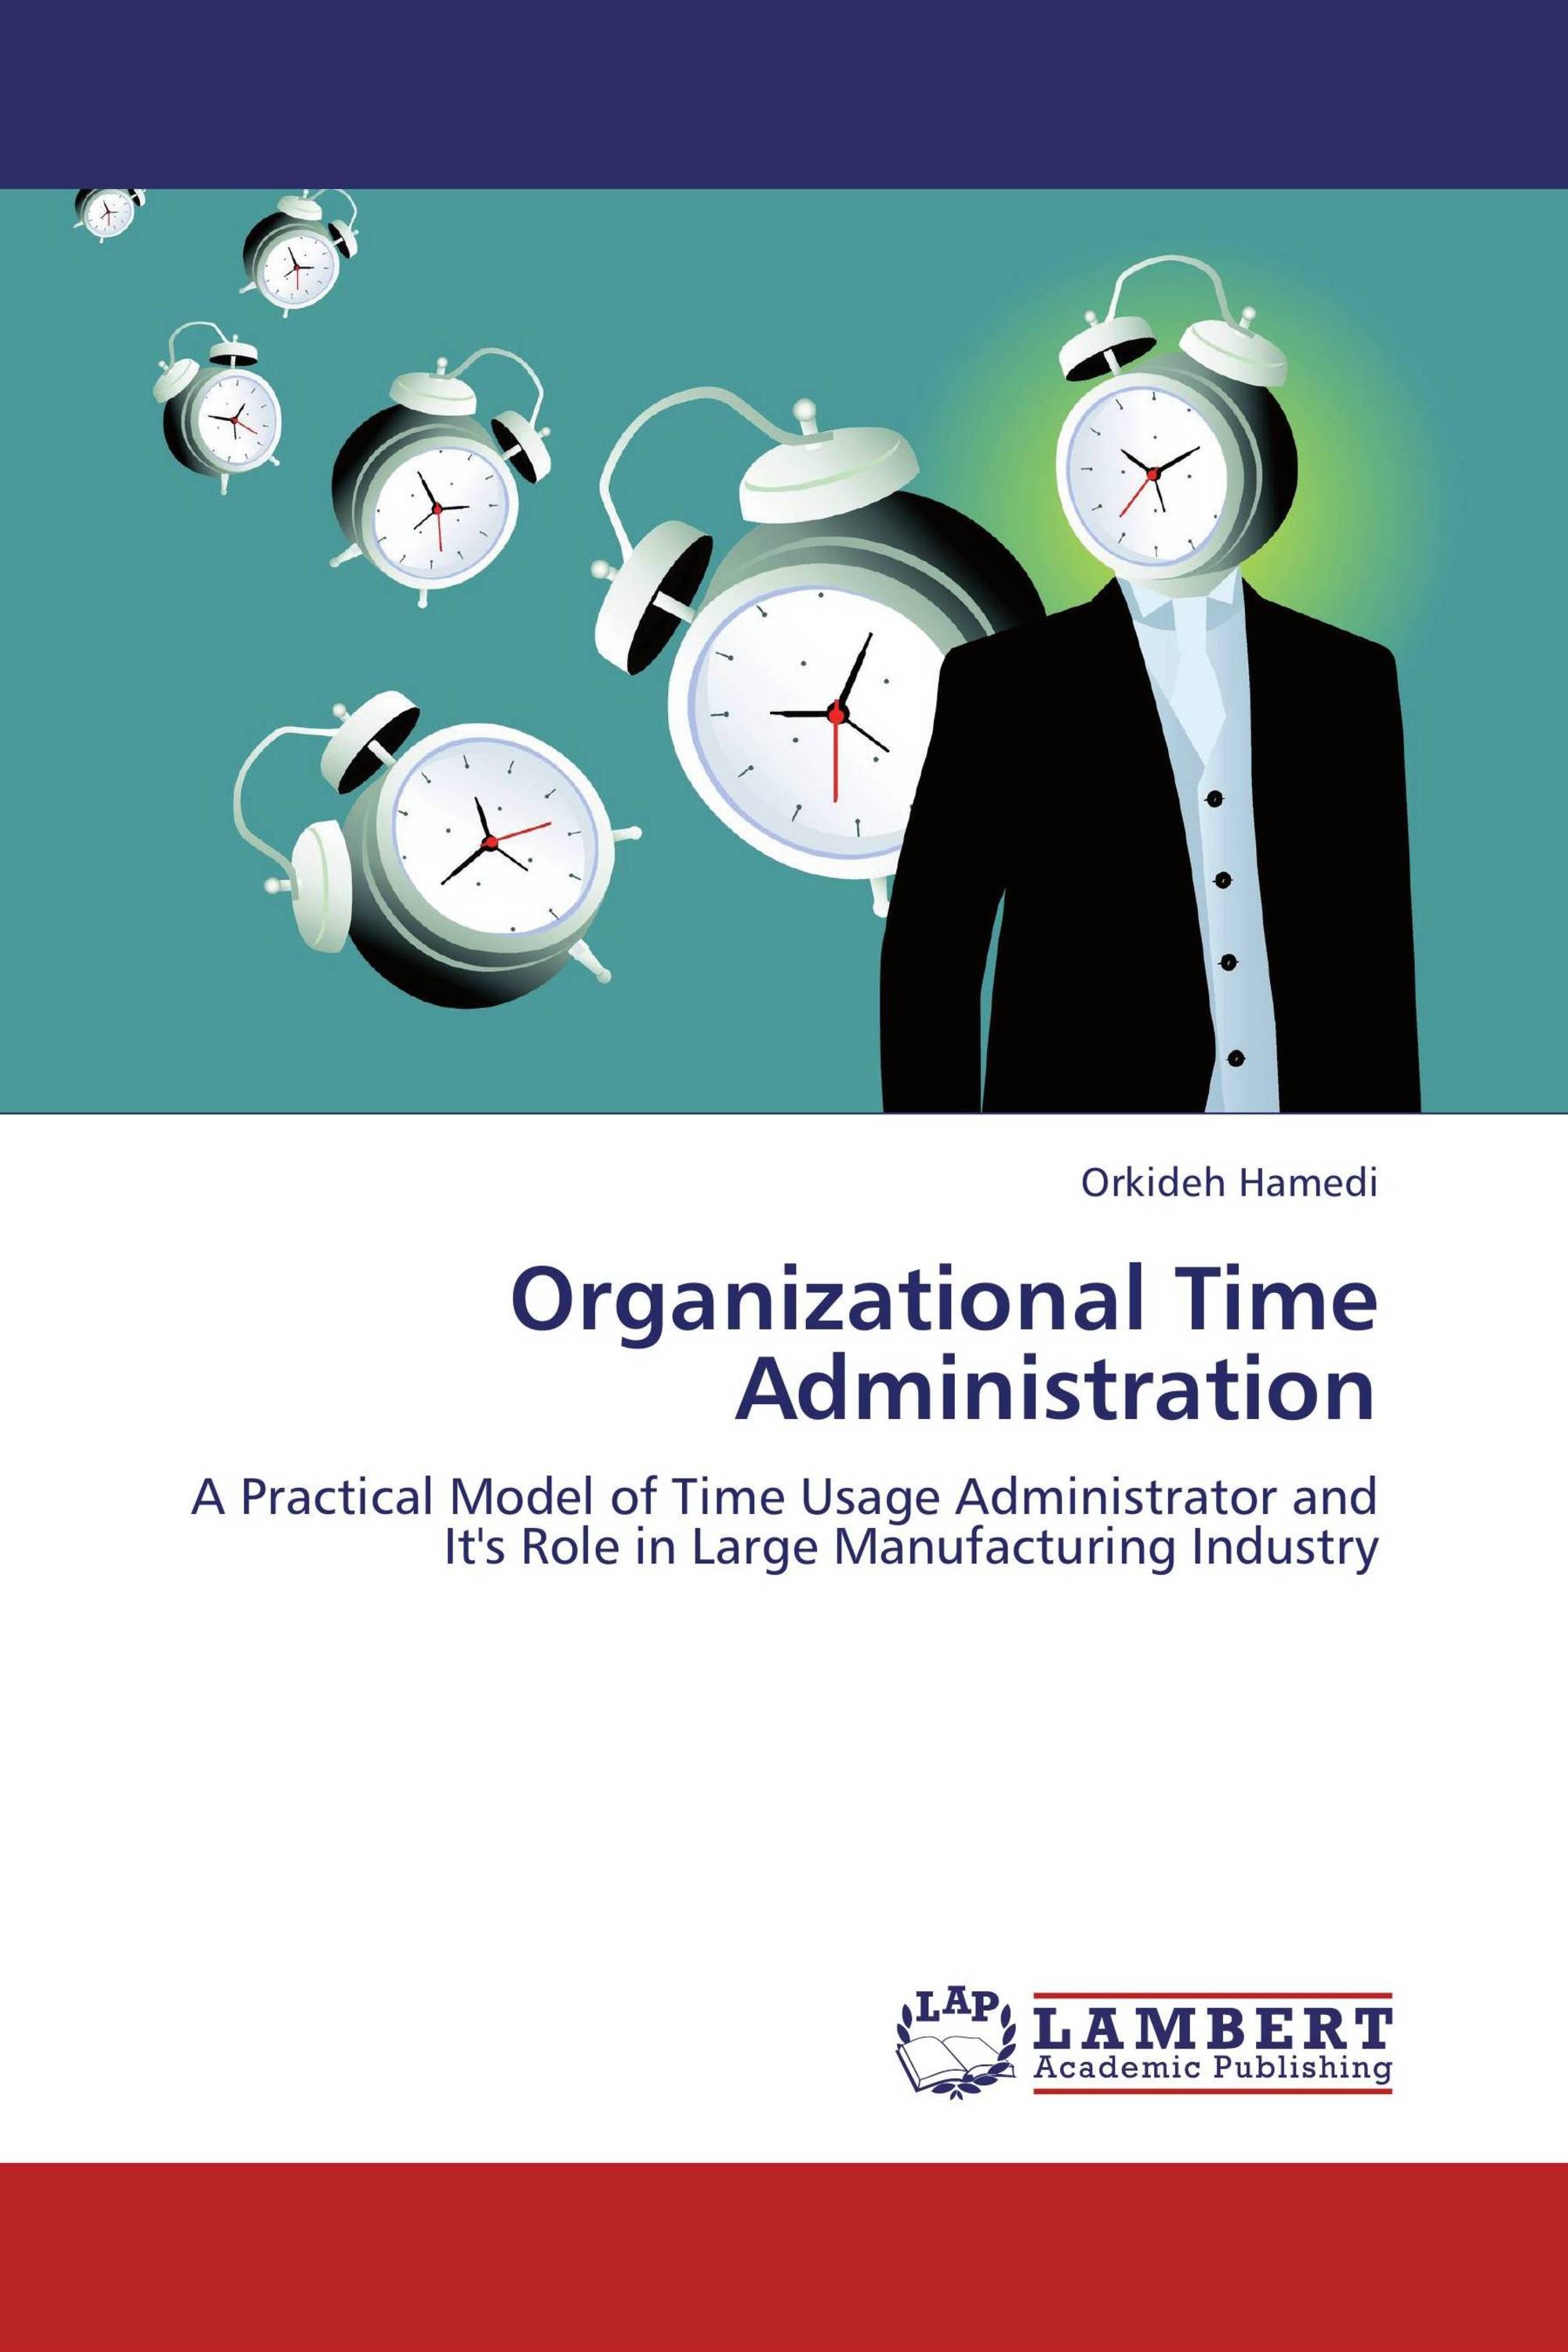 Time administrator. Organizations in time.